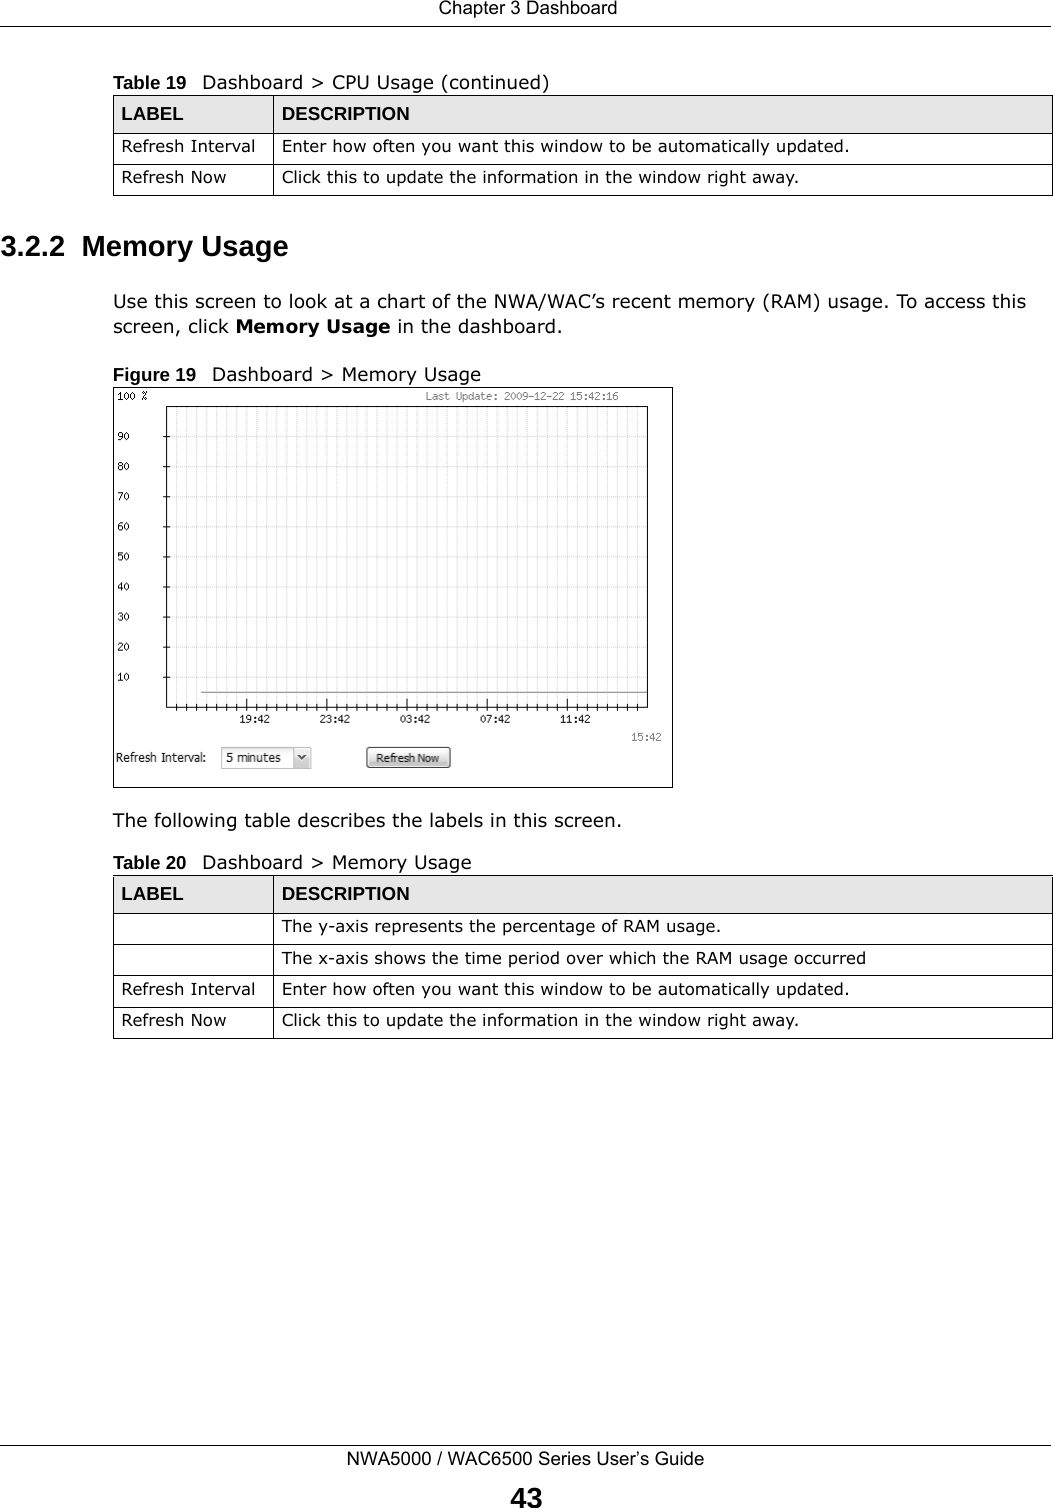  Chapter 3 DashboardNWA5000 / WAC6500 Series User’s Guide433.2.2  Memory UsageUse this screen to look at a chart of the NWA/WAC’s recent memory (RAM) usage. To access this screen, click Memory Usage in the dashboard.Figure 19   Dashboard &gt; Memory UsageThe following table describes the labels in this screen.  Refresh Interval Enter how often you want this window to be automatically updated.Refresh Now Click this to update the information in the window right away. Table 19   Dashboard &gt; CPU Usage (continued)LABEL DESCRIPTIONTable 20   Dashboard &gt; Memory UsageLABEL DESCRIPTIONThe y-axis represents the percentage of RAM usage.The x-axis shows the time period over which the RAM usage occurredRefresh Interval Enter how often you want this window to be automatically updated.Refresh Now Click this to update the information in the window right away. 